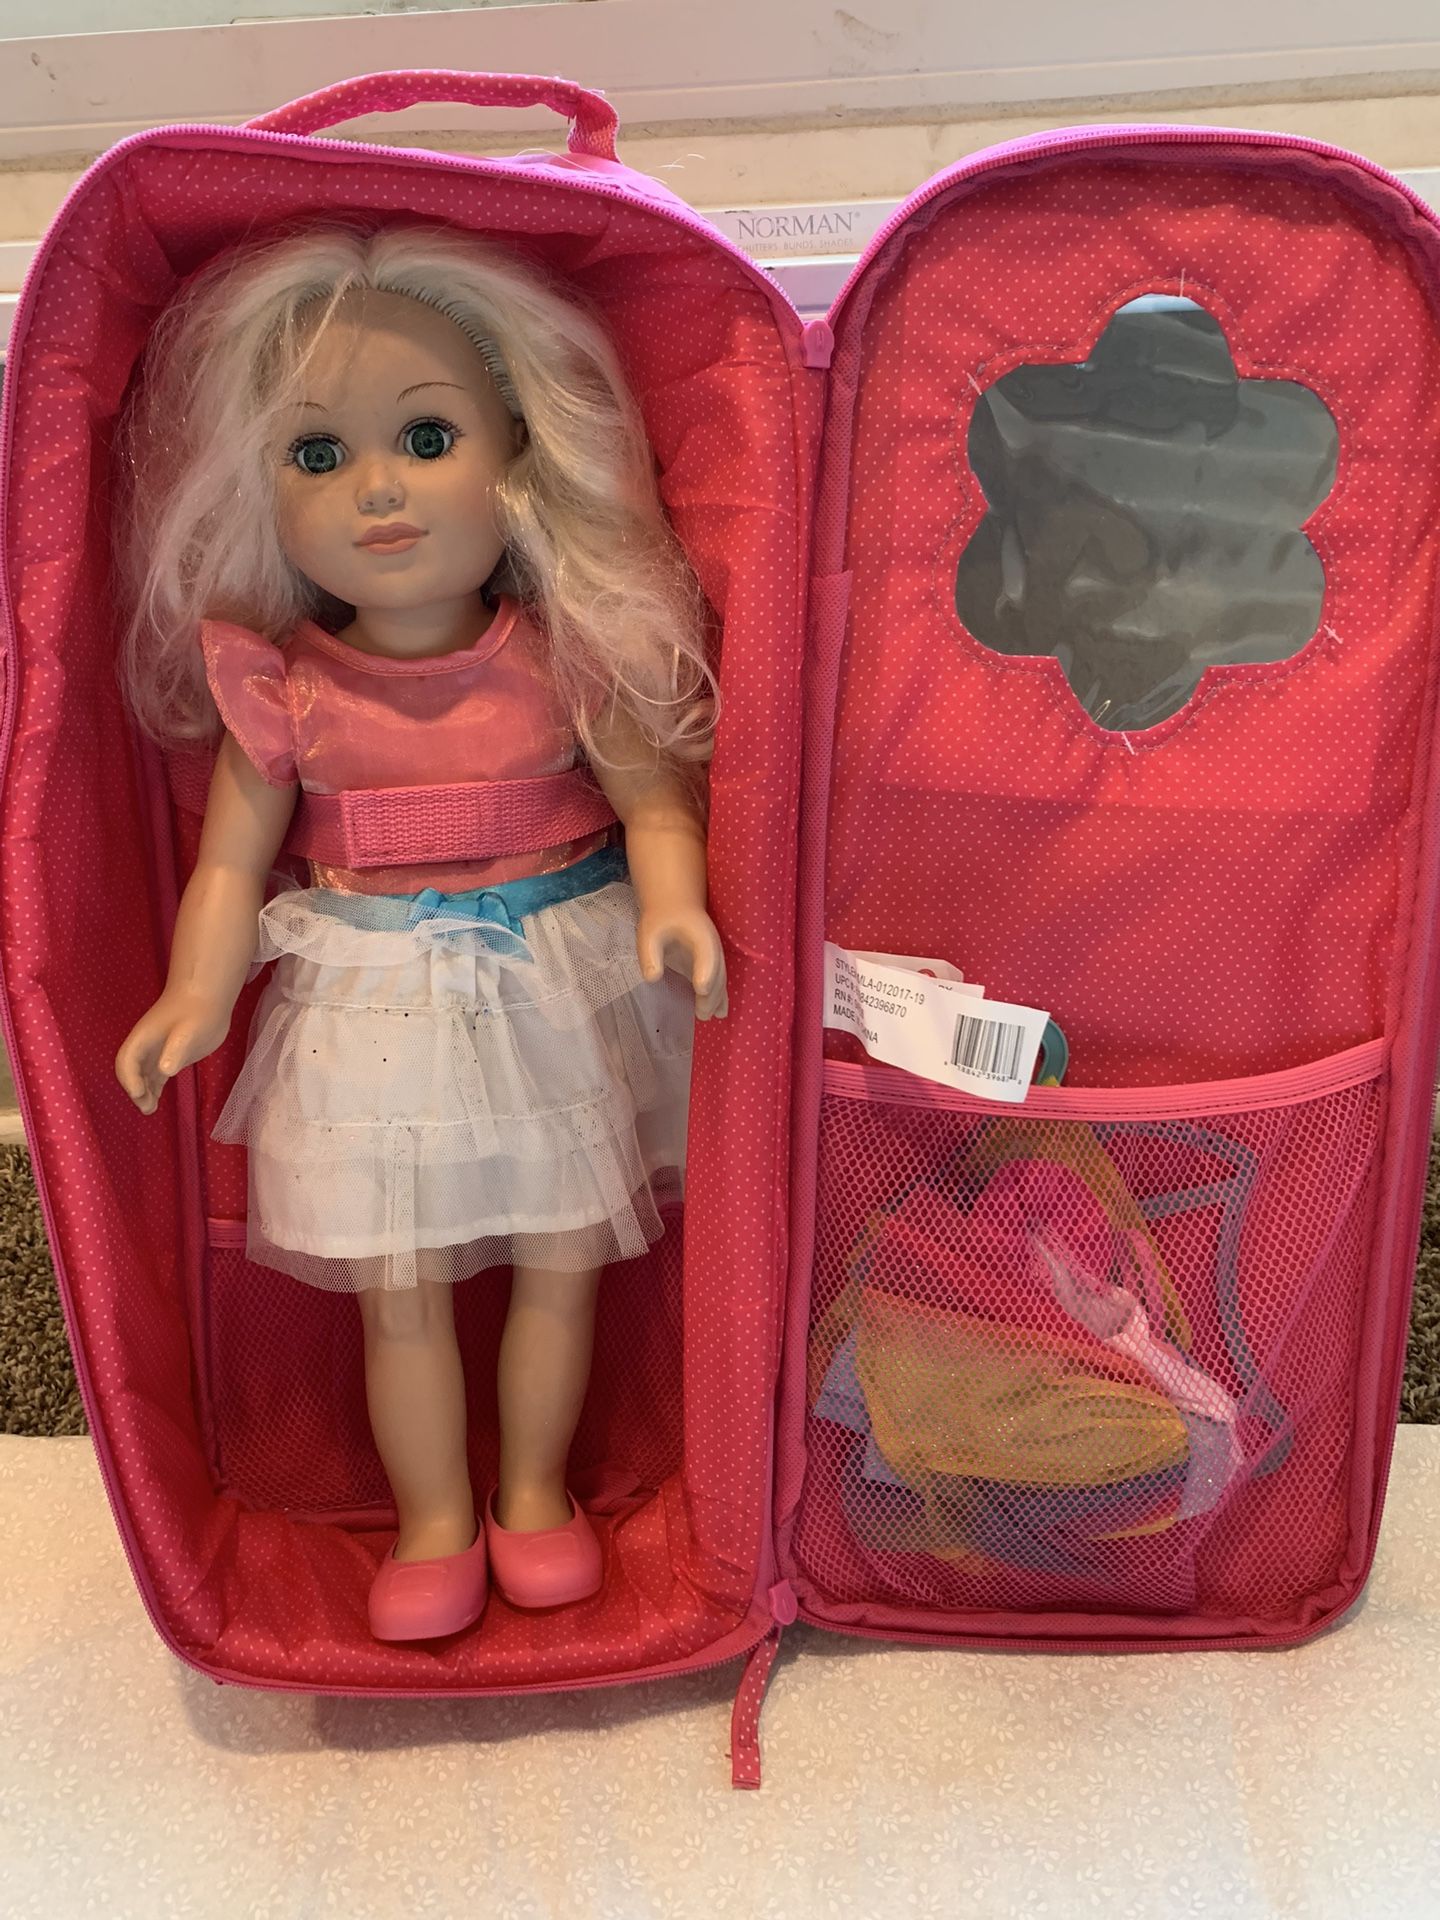 My Life As 18” Doll And Backpack Carrier + Accessories